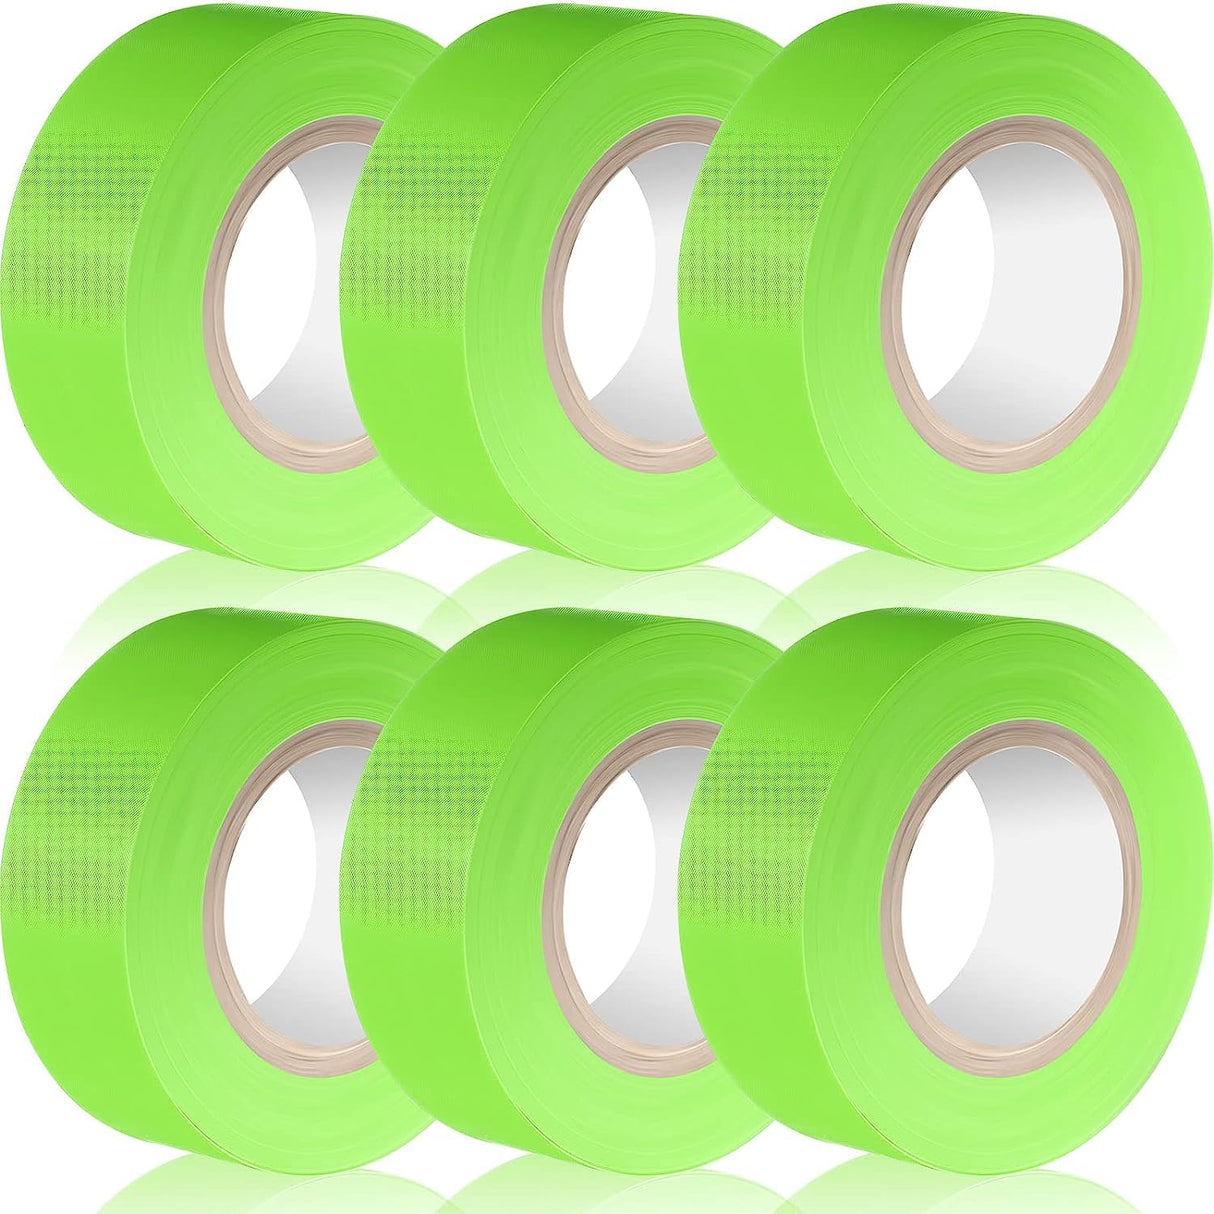 SINGHAL Flagging Tape Lime 1 Inch width 300 feet Length for marking and flagging various areas | Highly Visible (Combo Pack of 6)